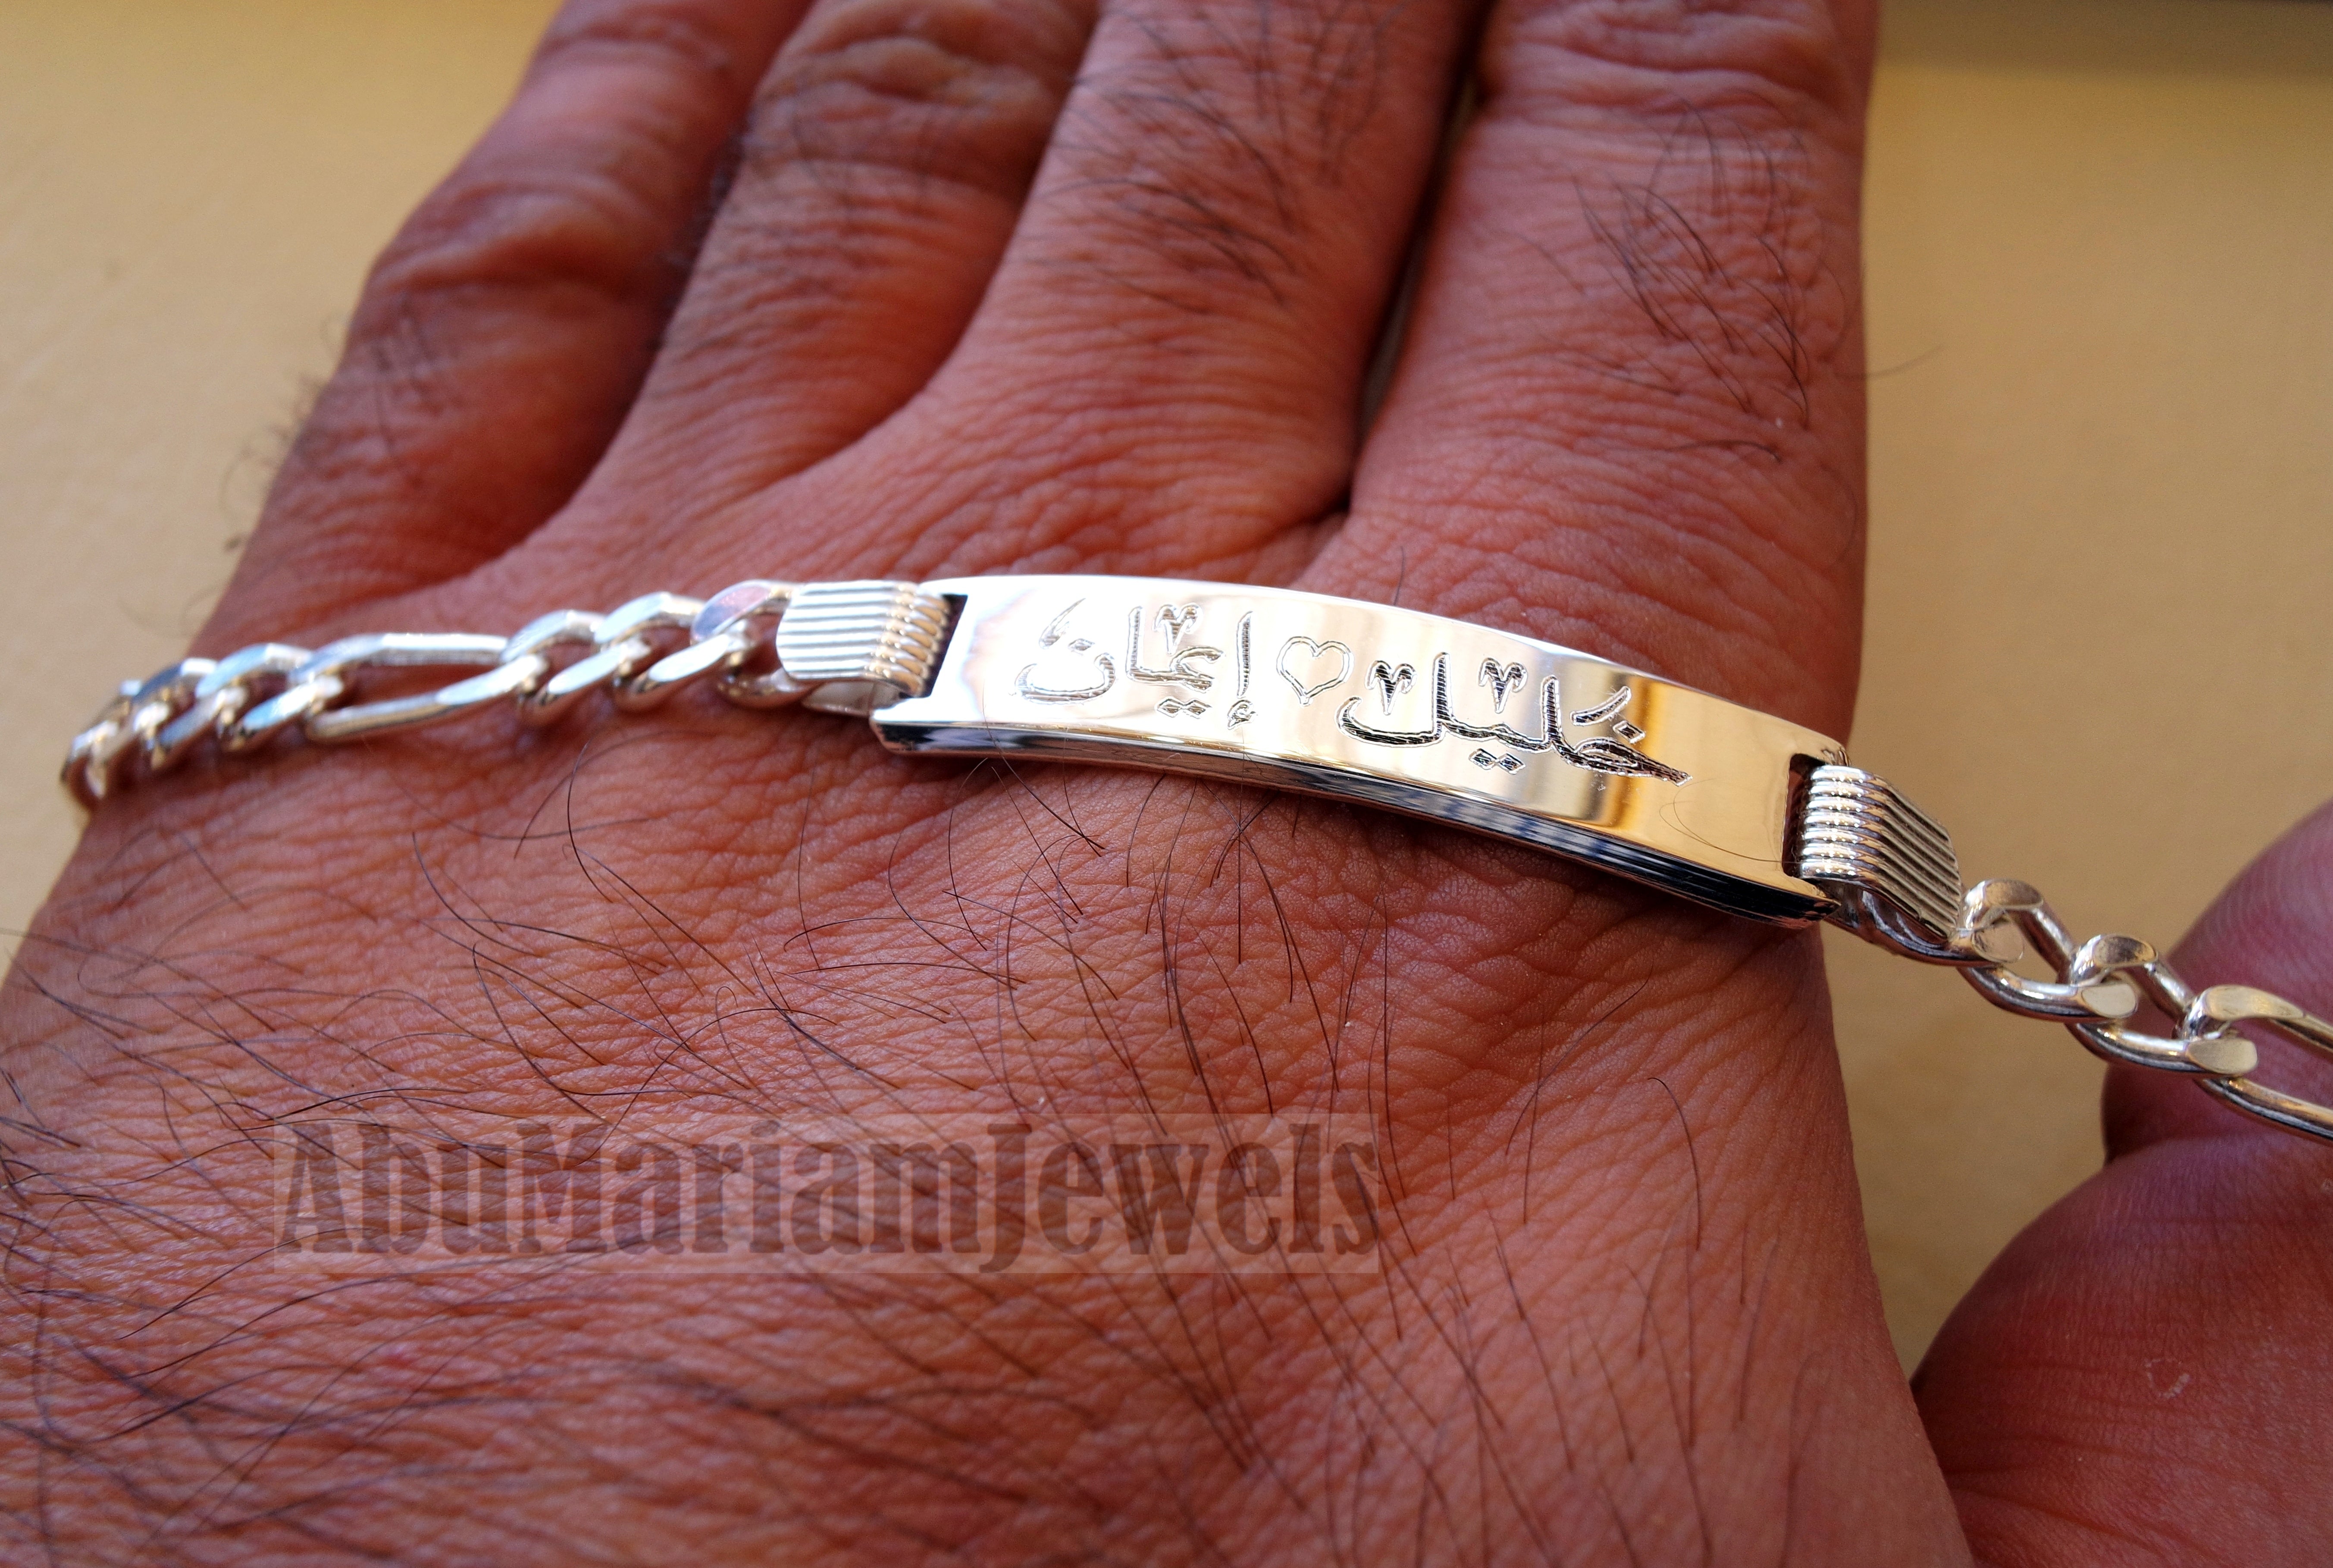 Thick Chain Bracelet for men from stainless steel inThessaloniki.